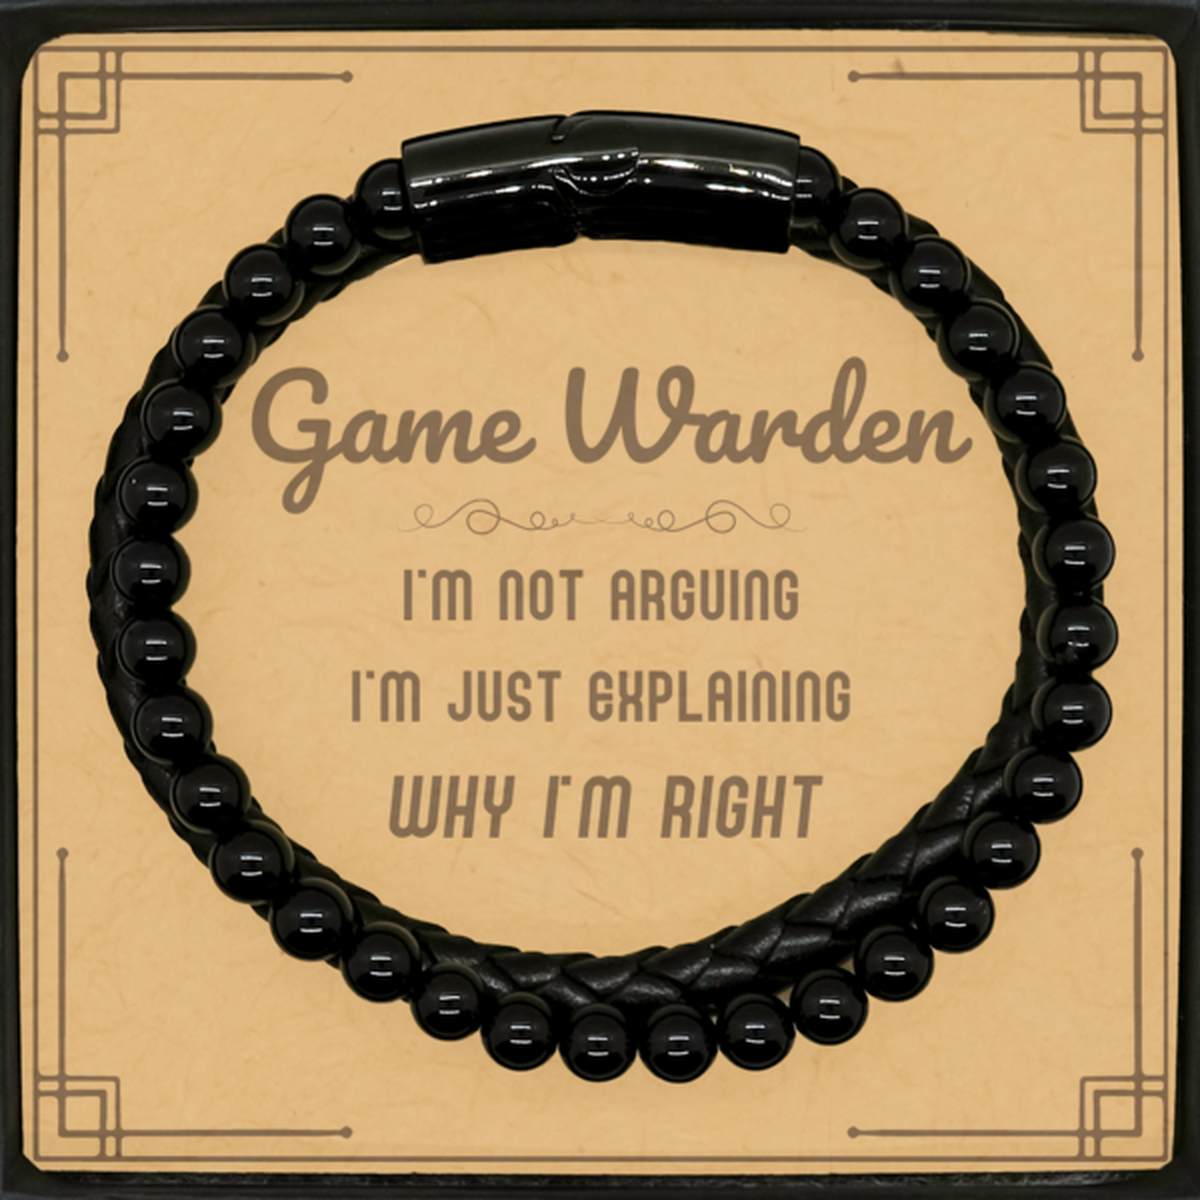 Game Warden I'm not Arguing. I'm Just Explaining Why I'm RIGHT Stone Leather Bracelets, Funny Saying Quote Game Warden Gifts For Game Warden Message Card Graduation Birthday Christmas Gifts for Men Women Coworker